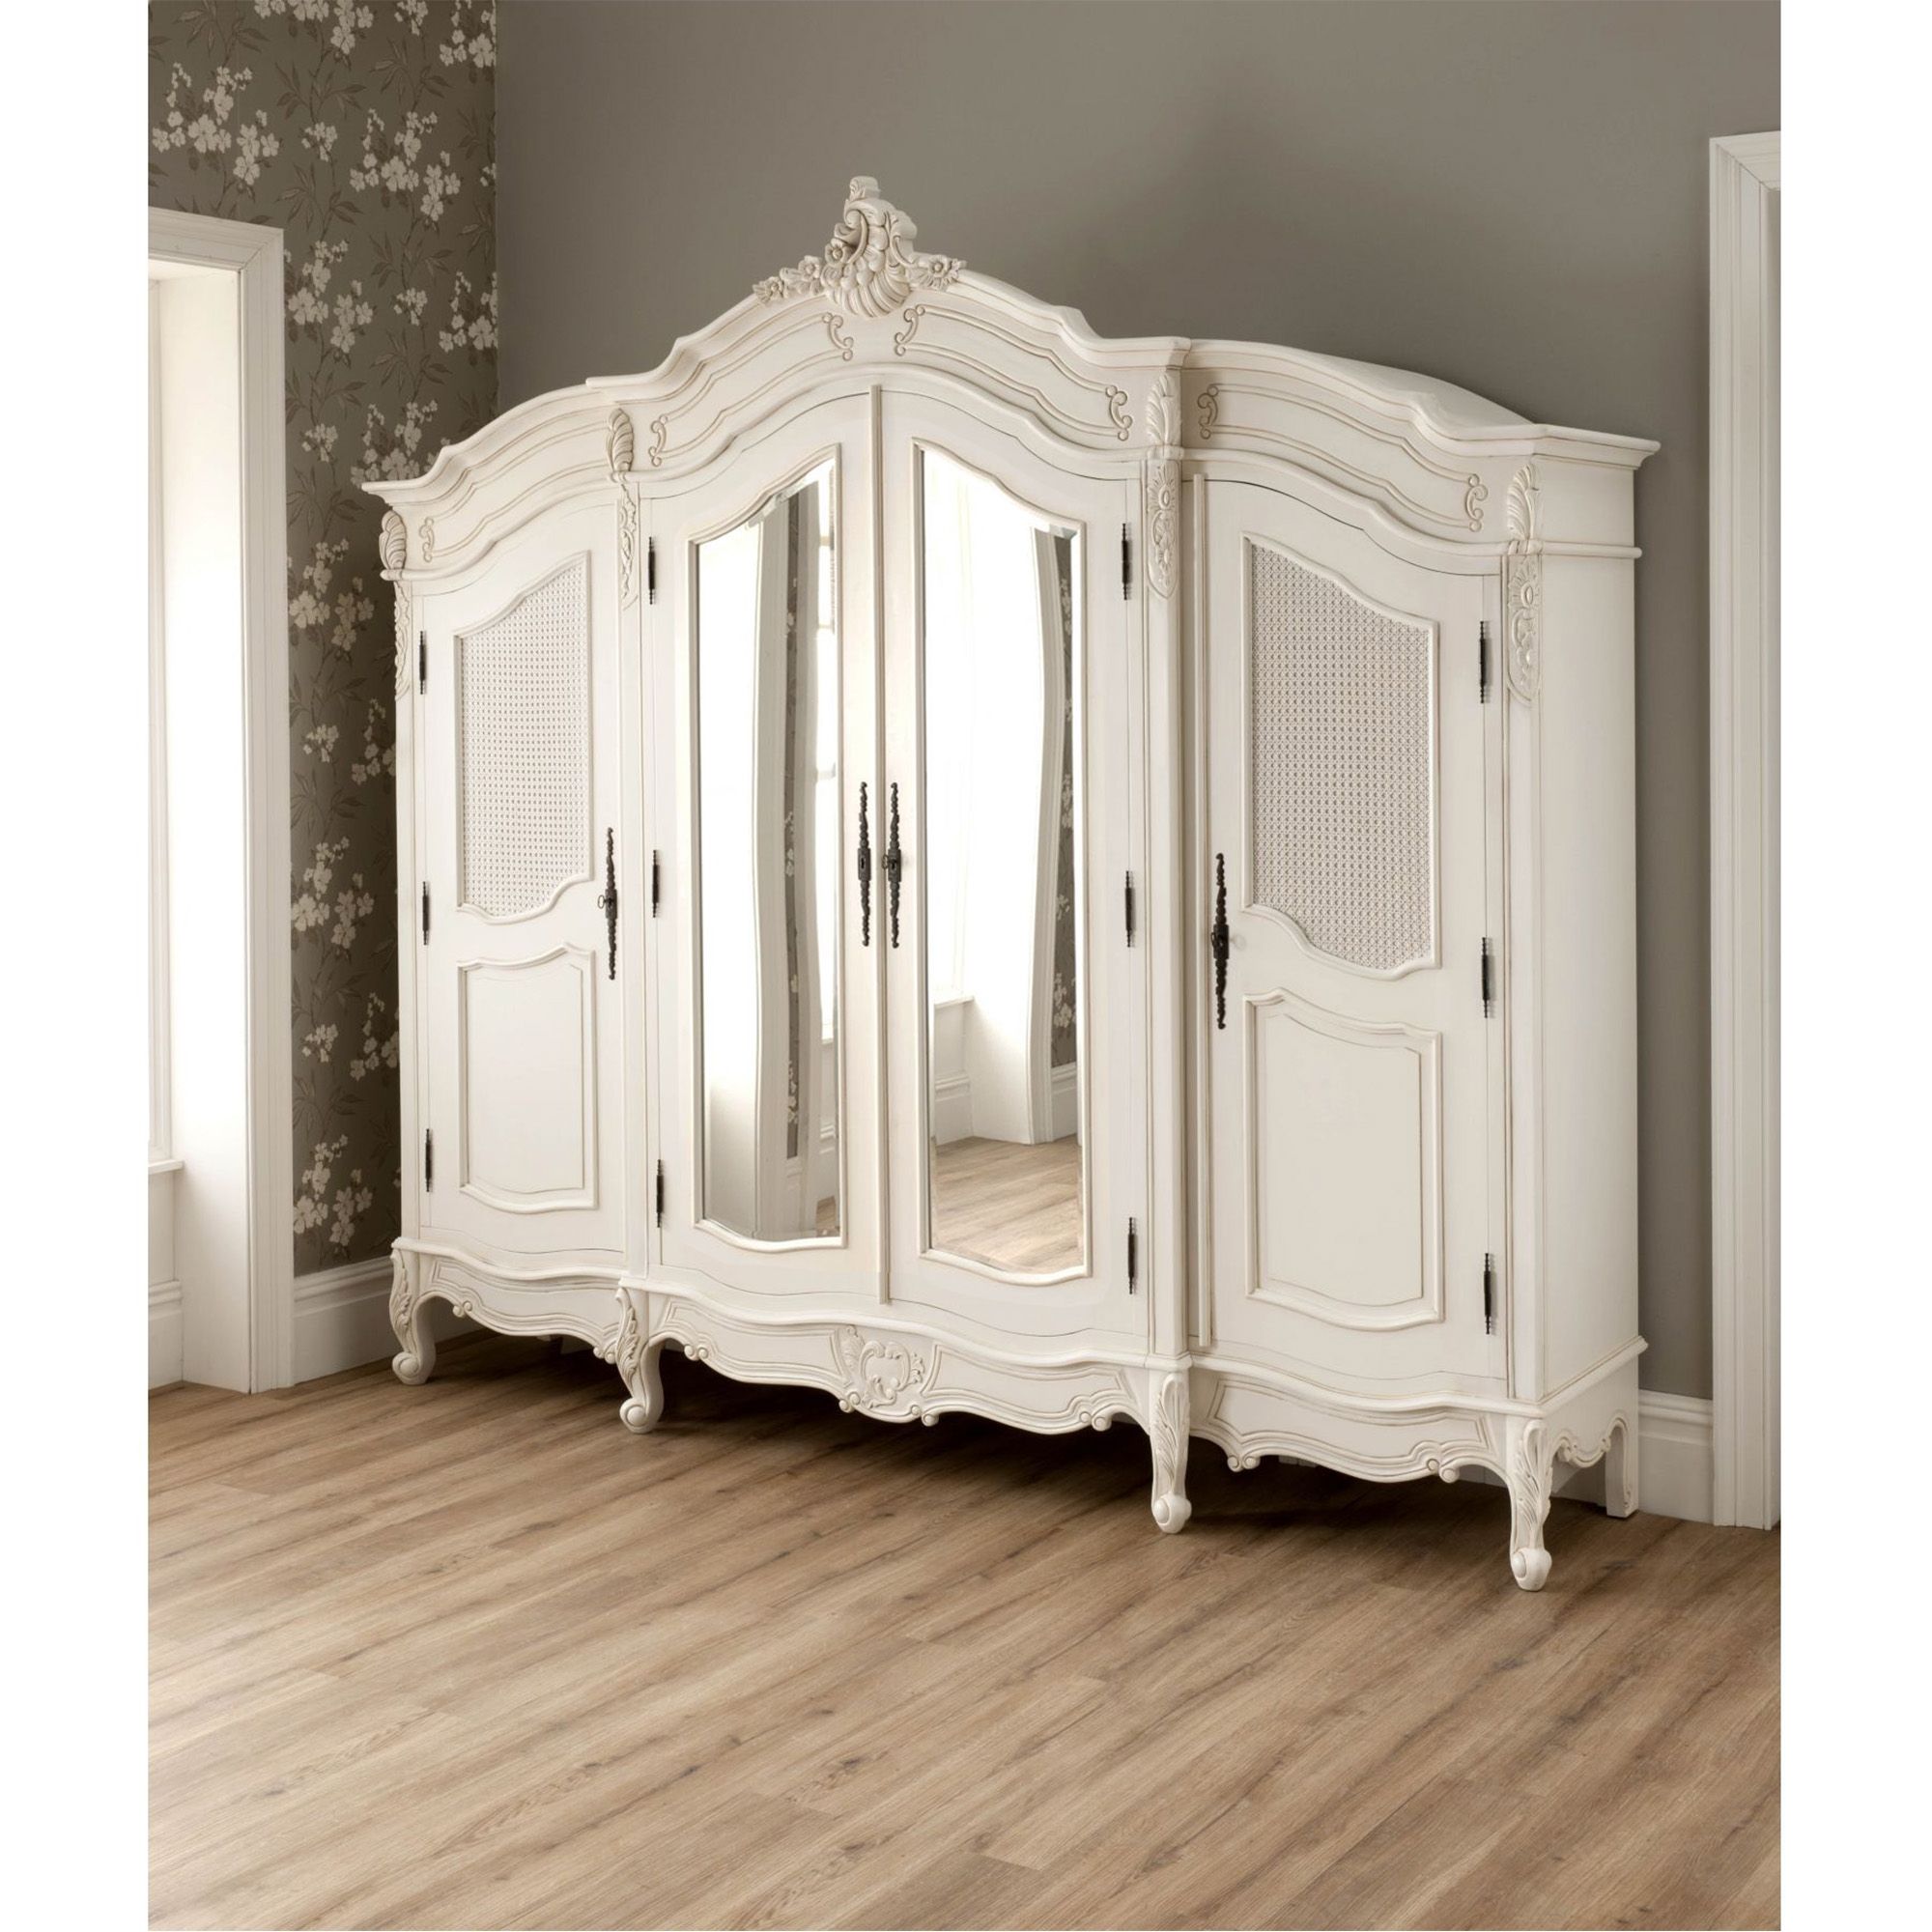 Antique French Wardrobe | Vintage Wardrobes | Antique Wardrobes | Throughout White French Style Wardrobes (View 12 of 15)